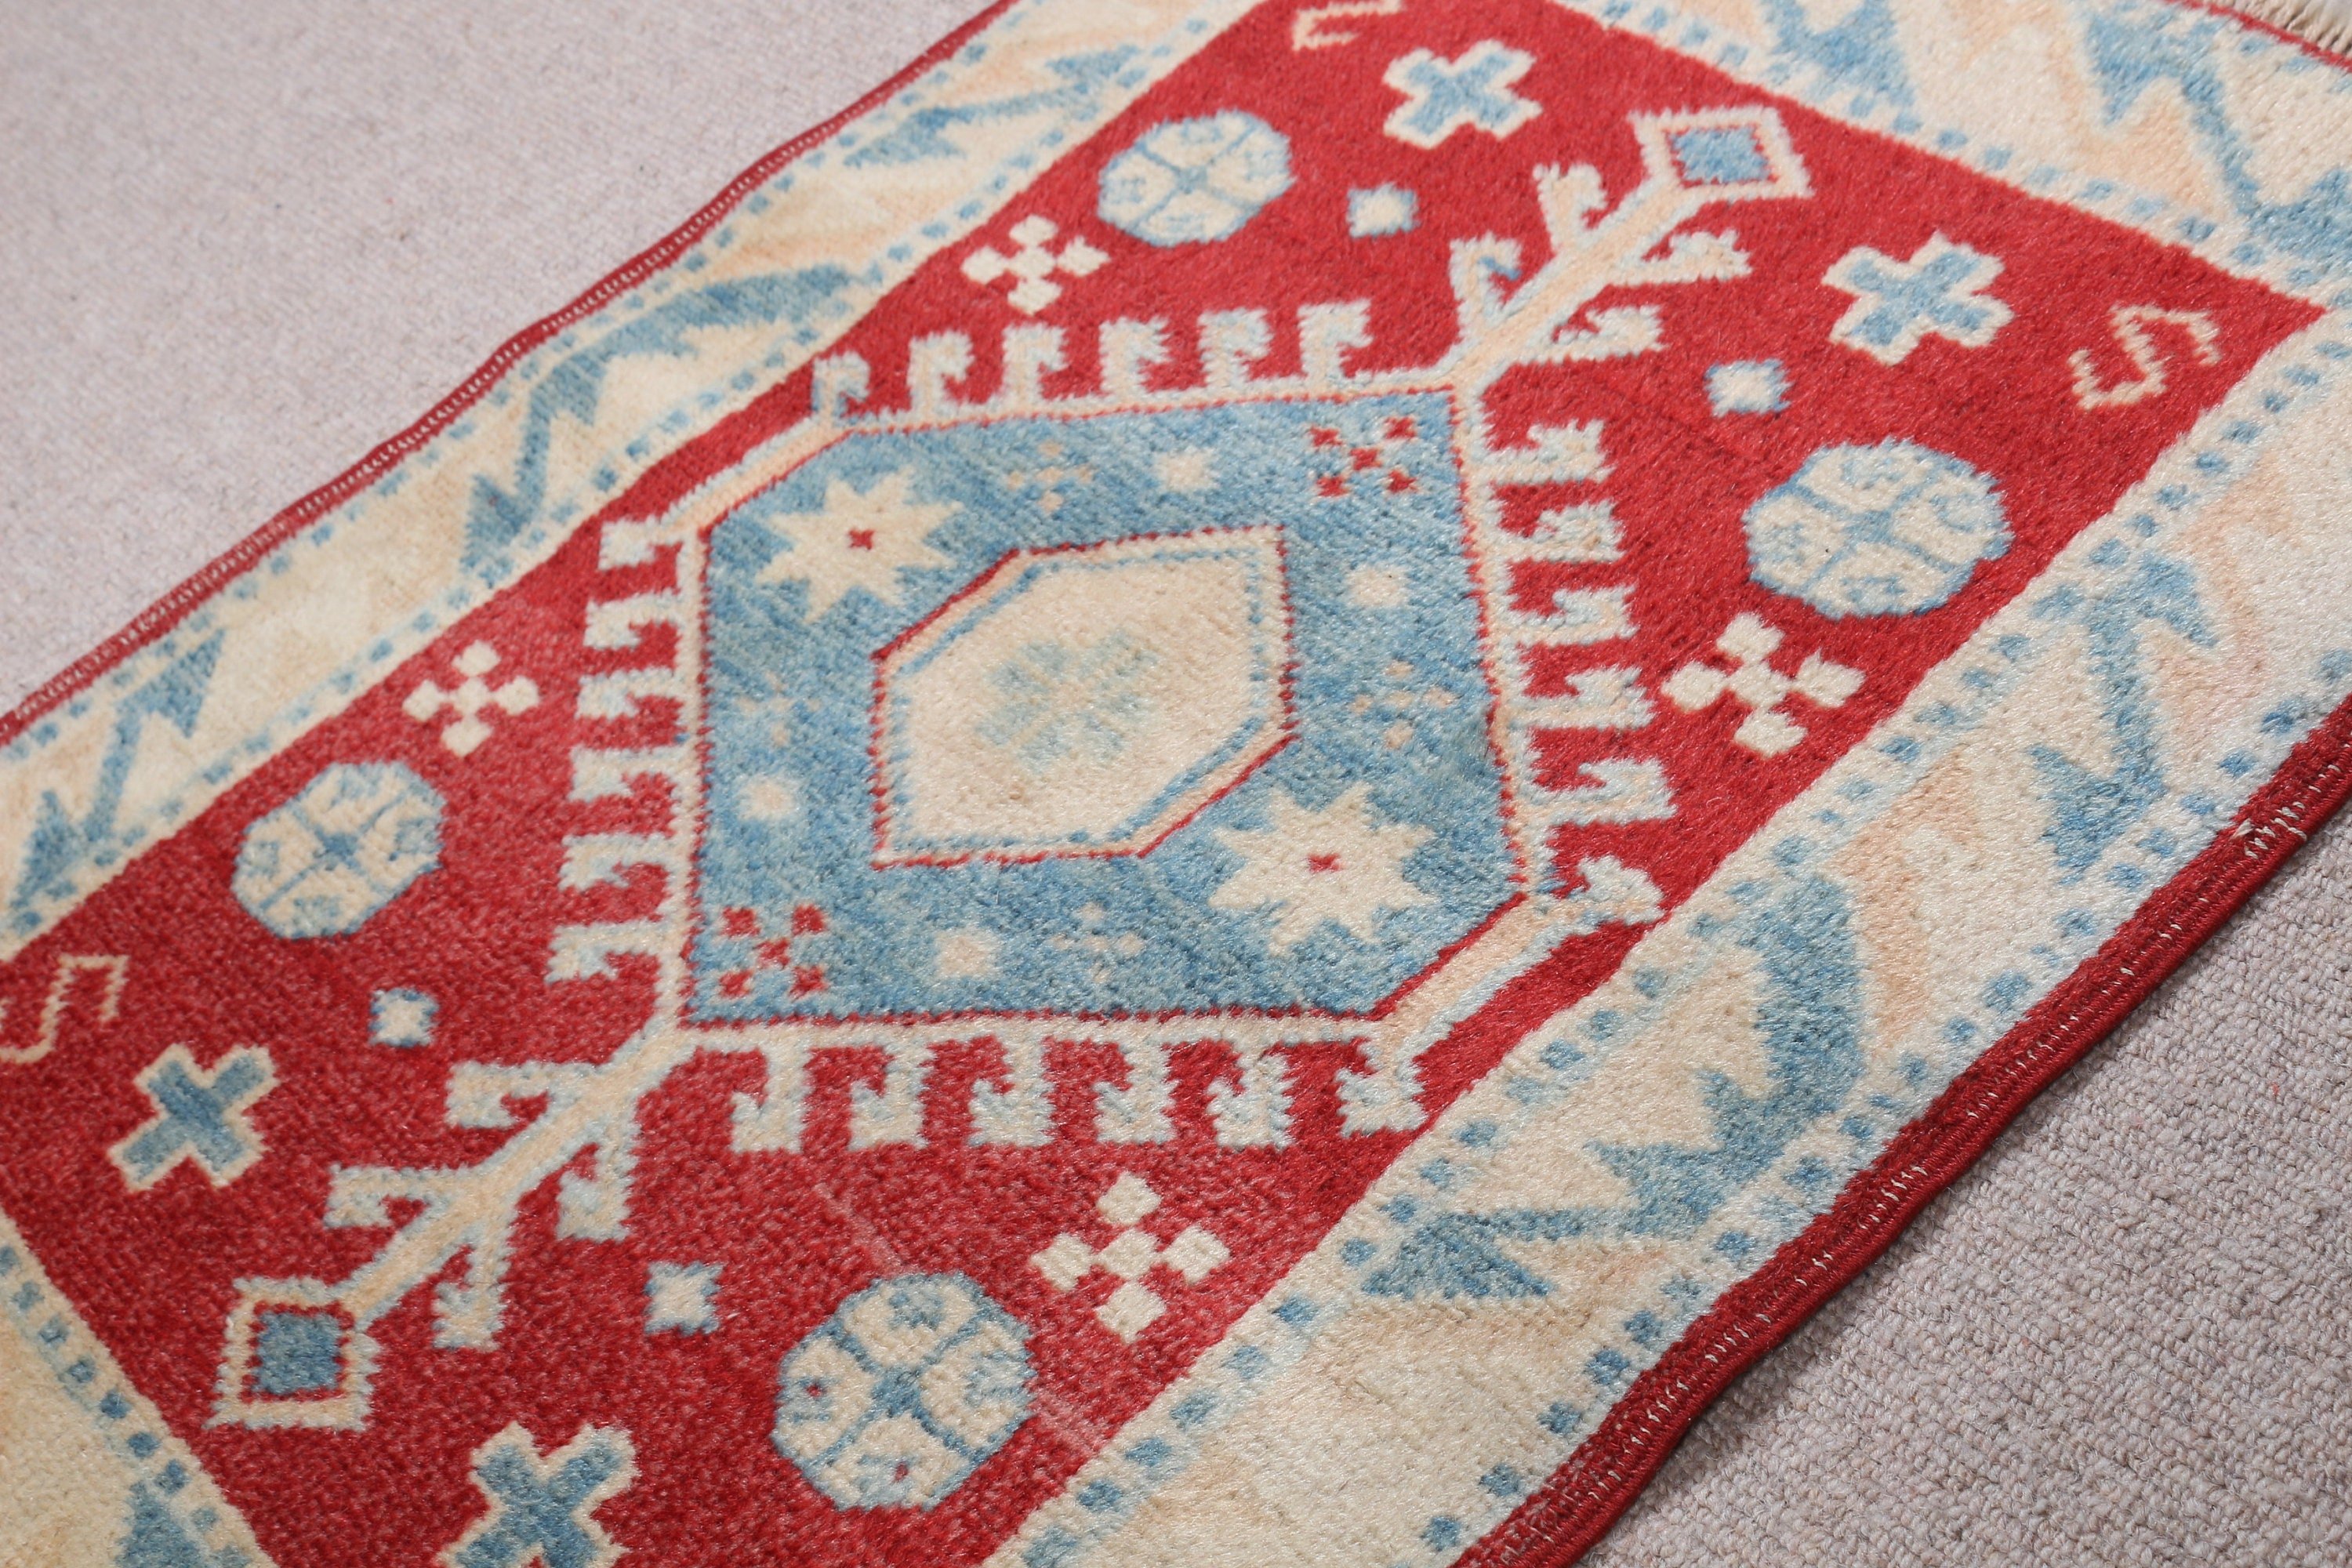 Kitchen Rugs, Turkish Rugs, Home Decor Rugs, Distressed Rug, Anatolian Rugs, Door Mat Rug, 2x2.7 ft Small Rug, Vintage Rugs, Red Cool Rug